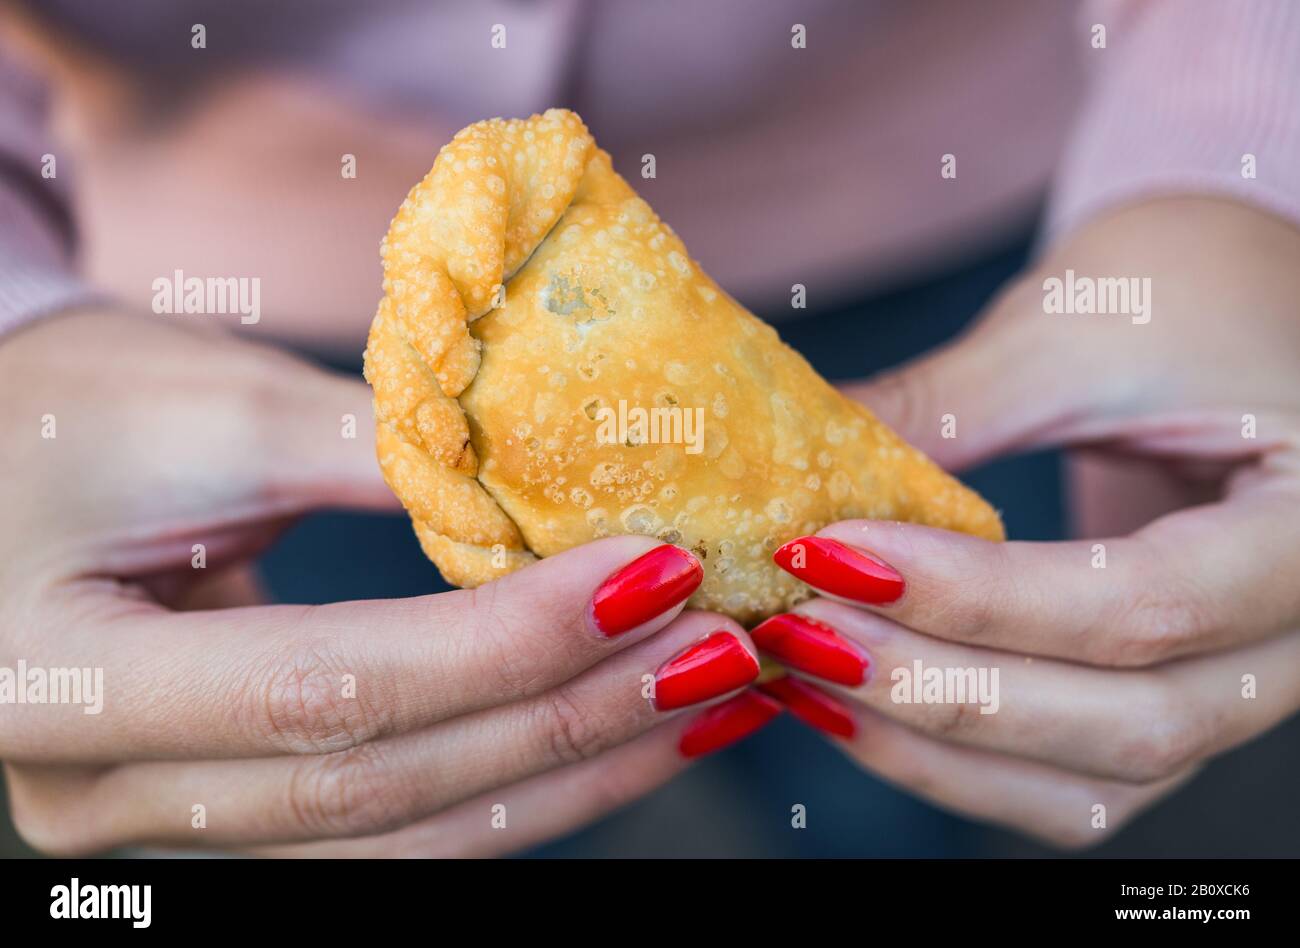 Eating traditional fried Spanish and Argentine empanadas at street food market. Stock Photo